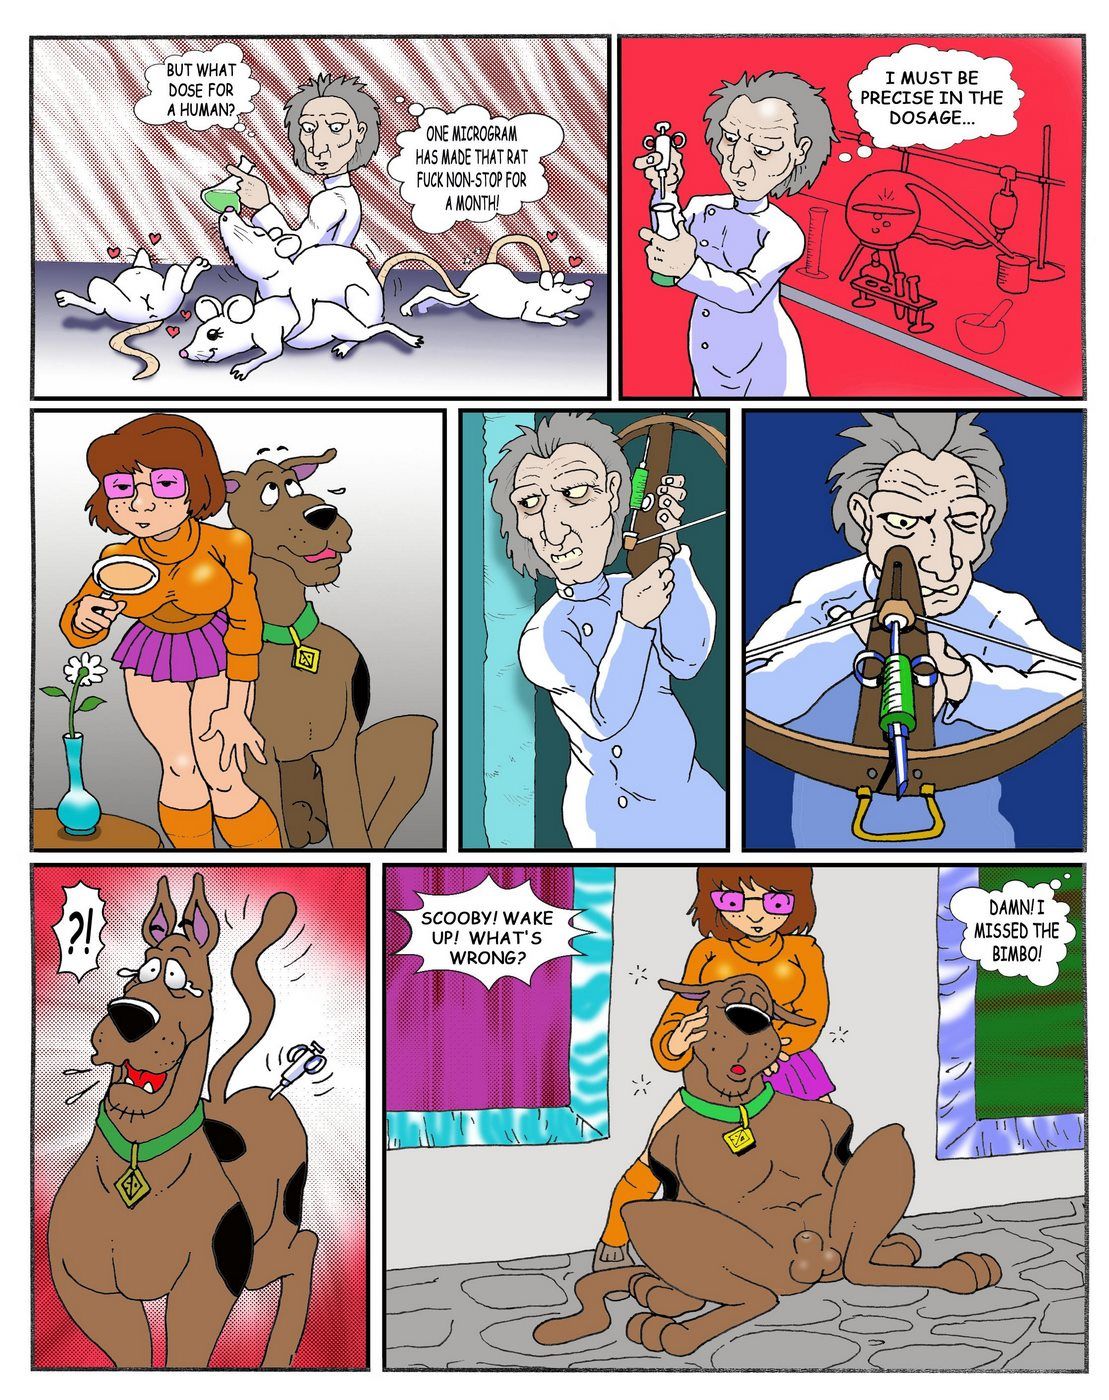 Mystery of the Sexual Weapon (Scooby-Doo) page 4